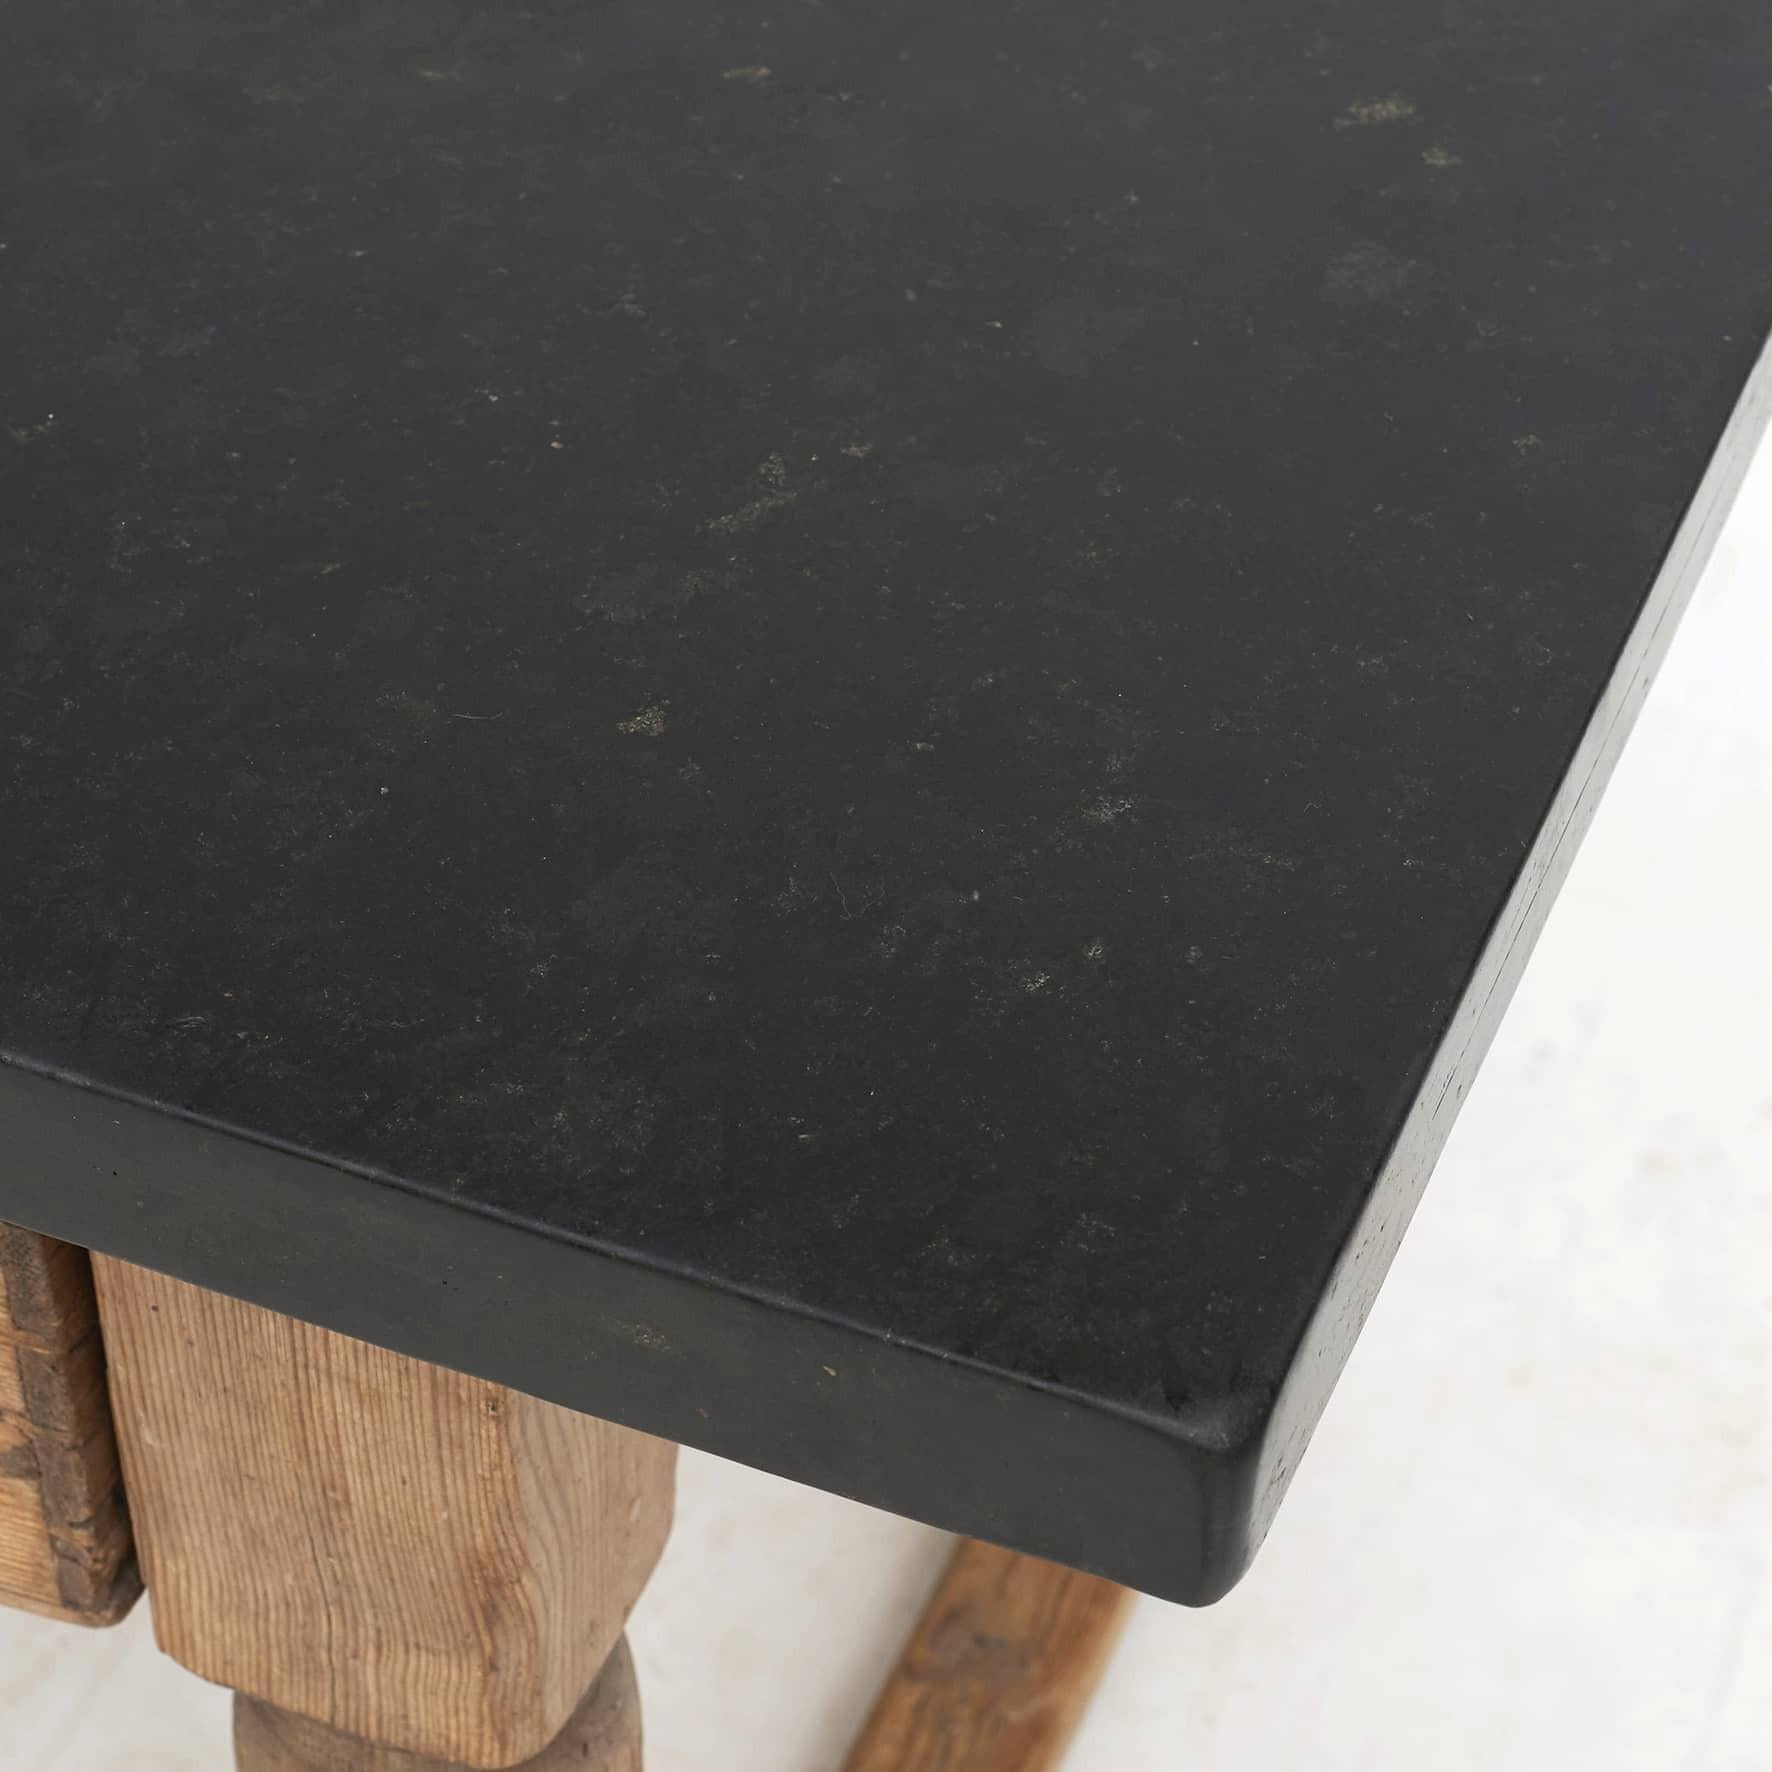 Stone Antique Swedish Baroque Table With Black Jämtland Limestone Top For Sale